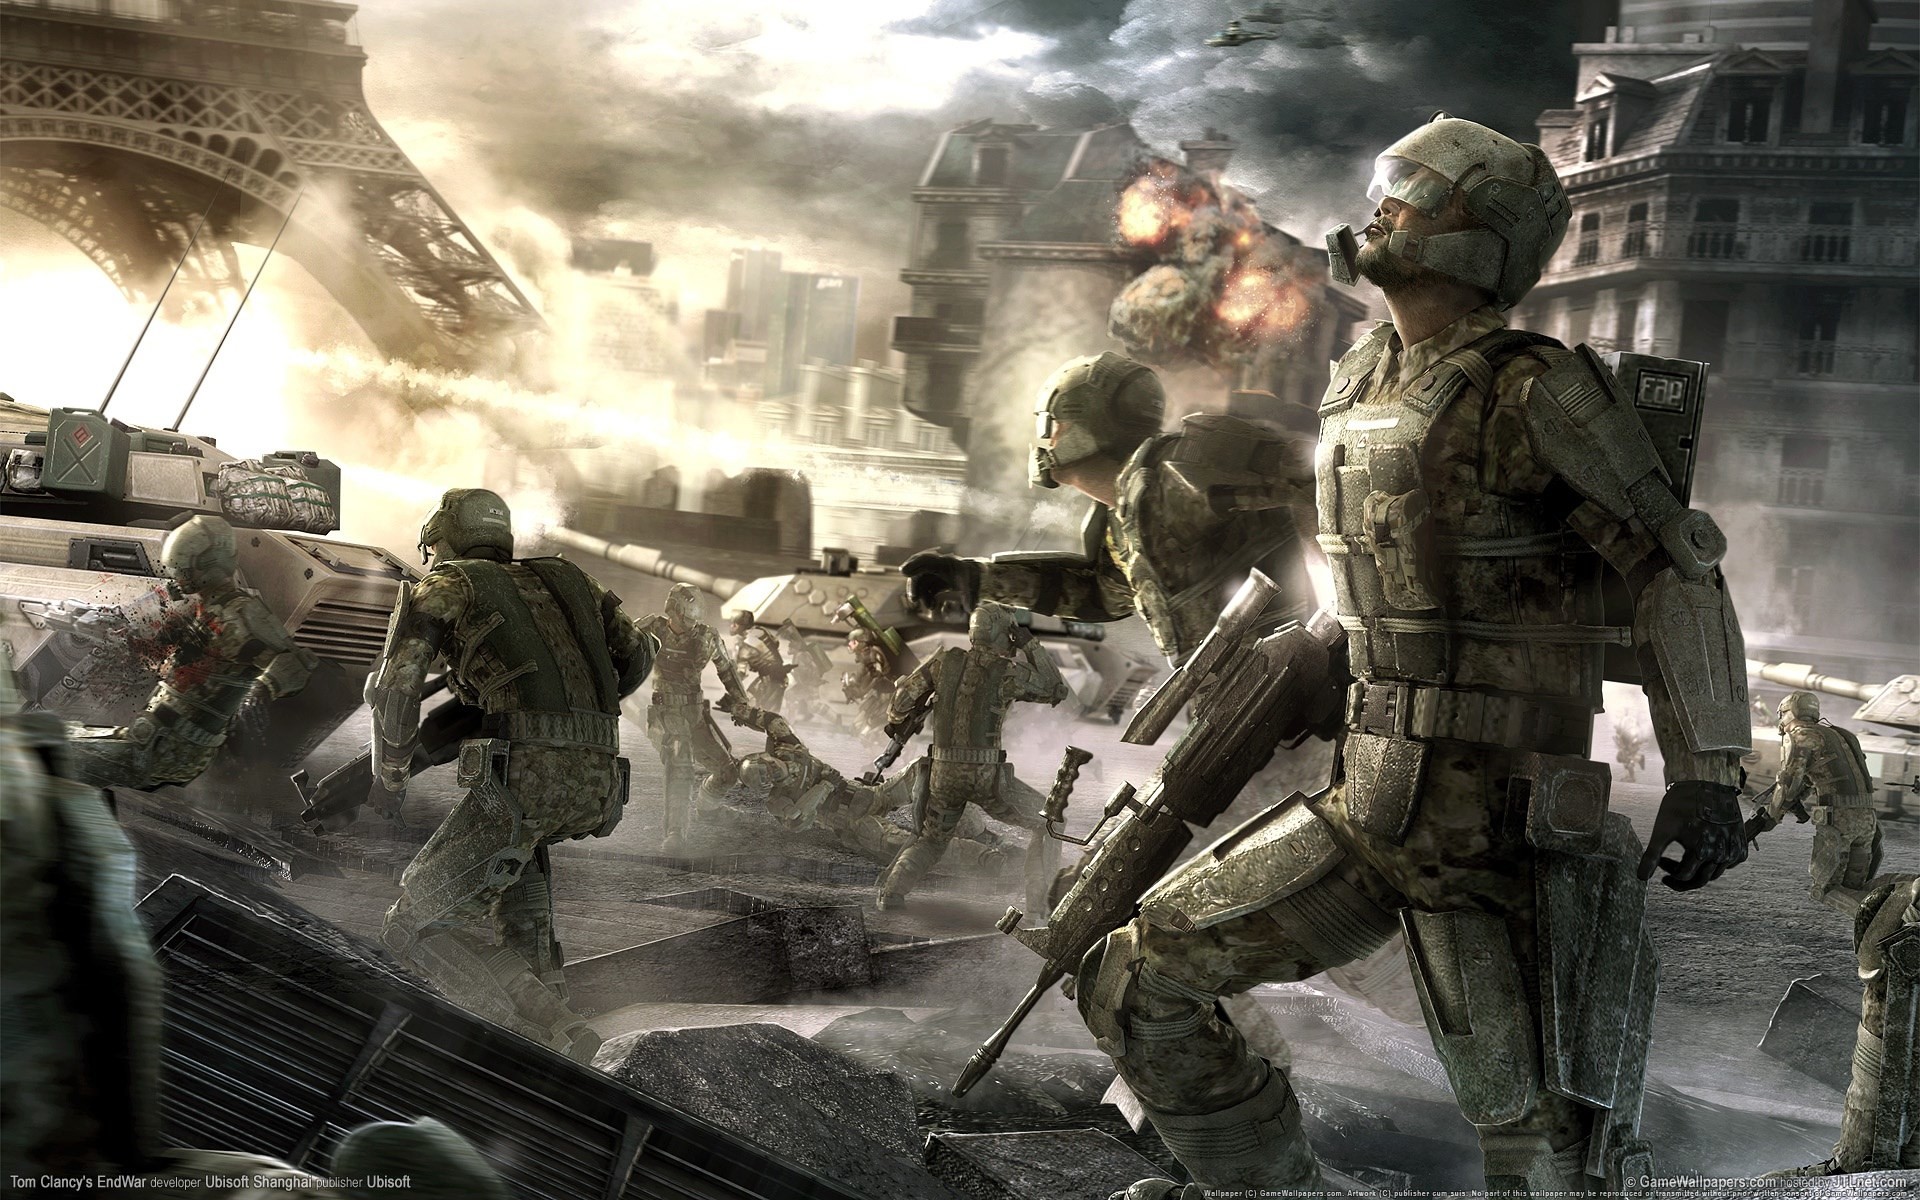 1920x1200 call-of-duty-ghosts-wallpaper | Sniper Ghost Warrior 2 Wallpapers |  Pinterest | Wallpaper and Warriors wallpaper